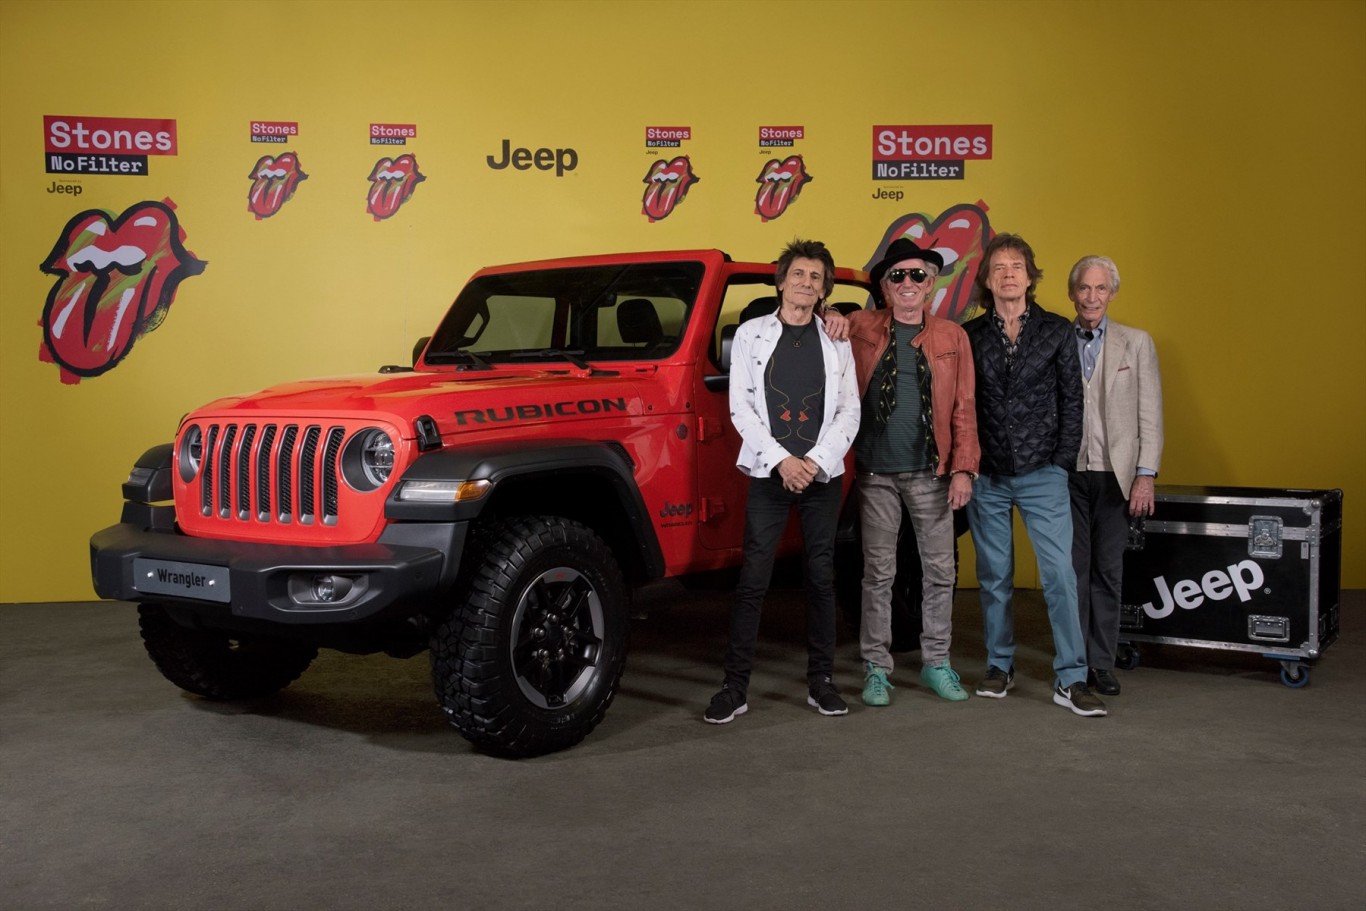 Jeep Wrangler, sponsor of the Rolling Stones No Filter Tour, in Warsaw for tour finale